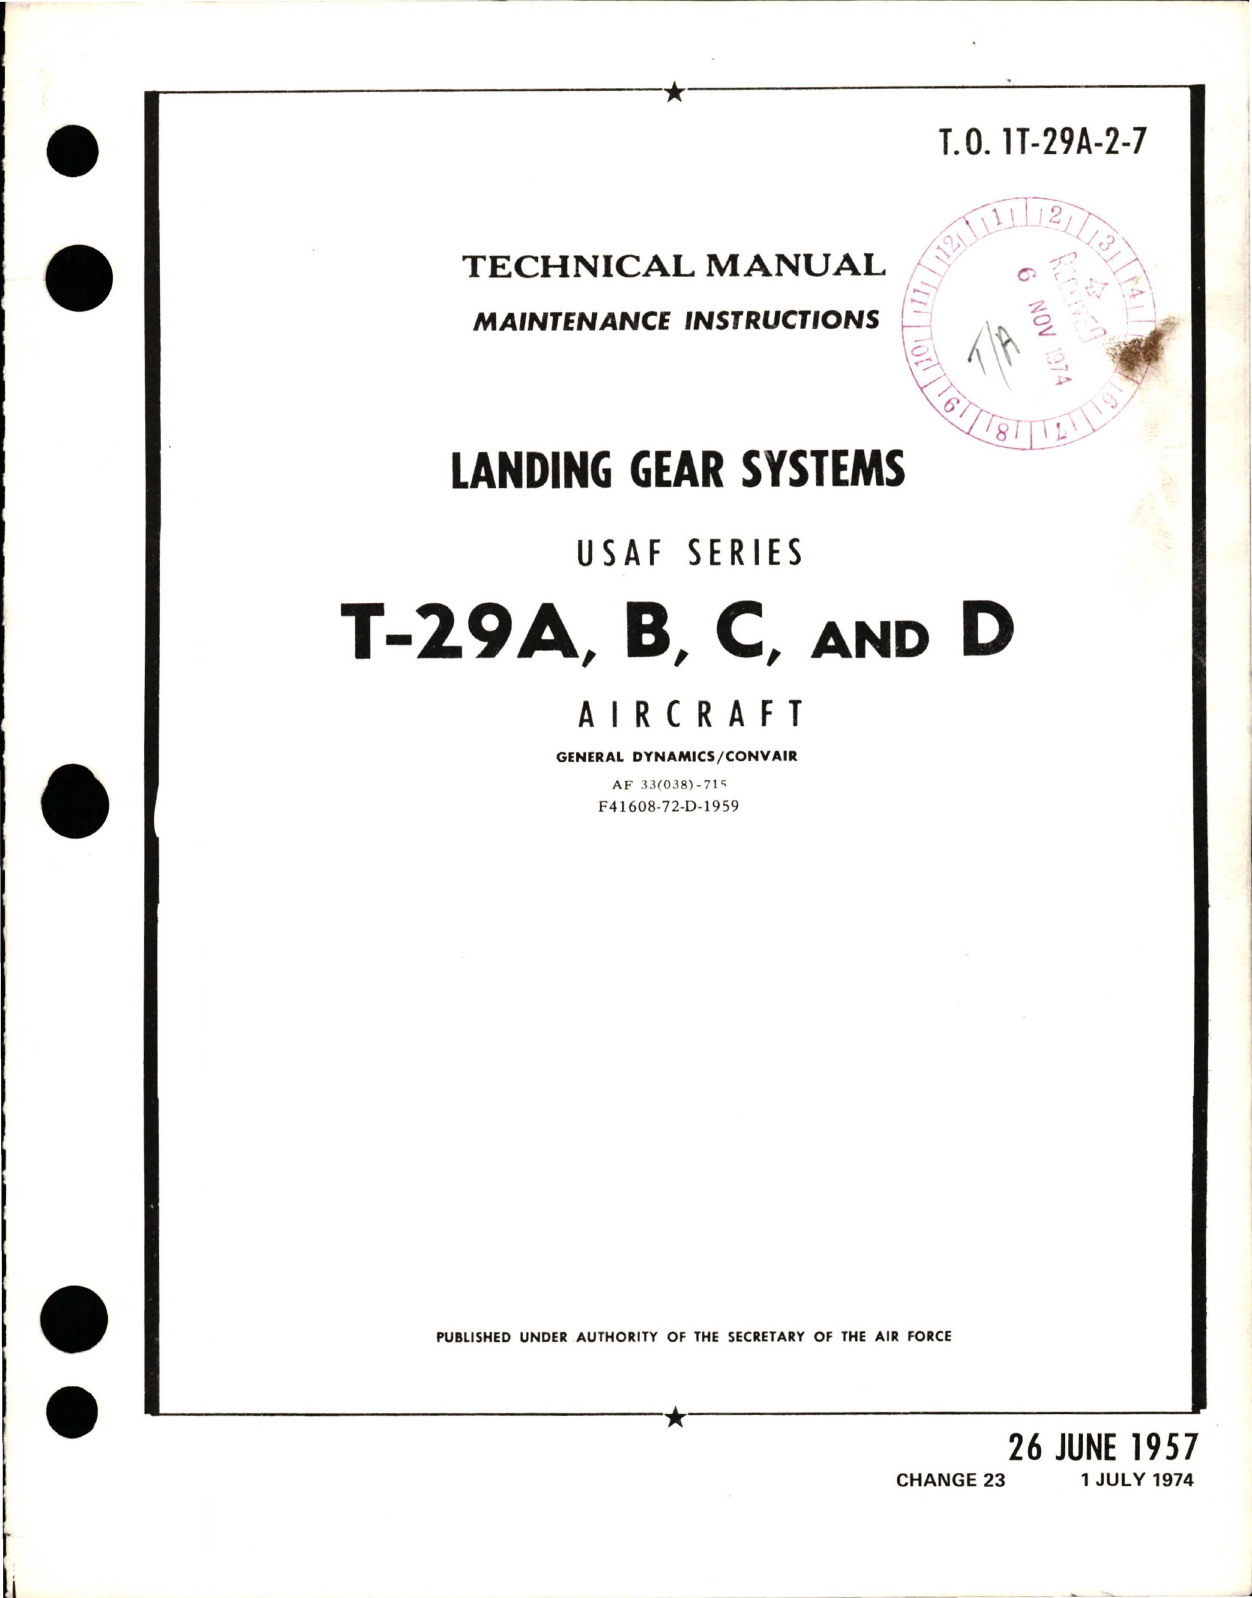 Sample page 1 from AirCorps Library document: Maintenance Instructions for Landing Gear Systems for T-29A, T-29B, T-29C and T-29A